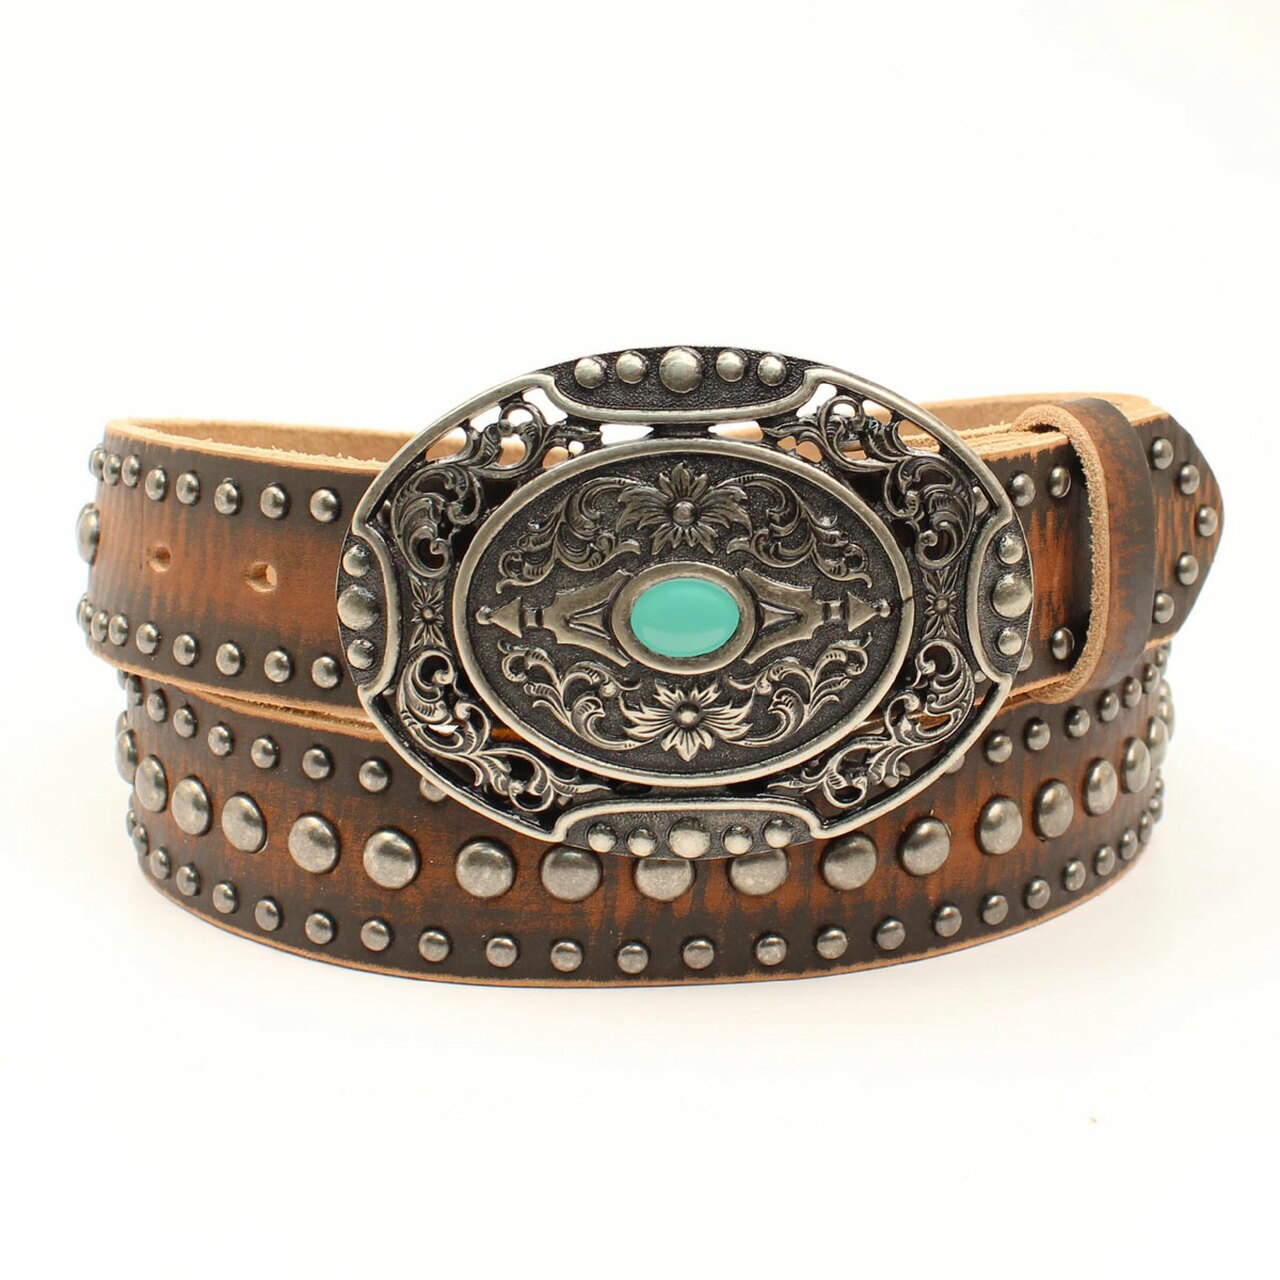 Ariat Ladies Distressed Brown Nail-head Studded Leather Belt A1529002